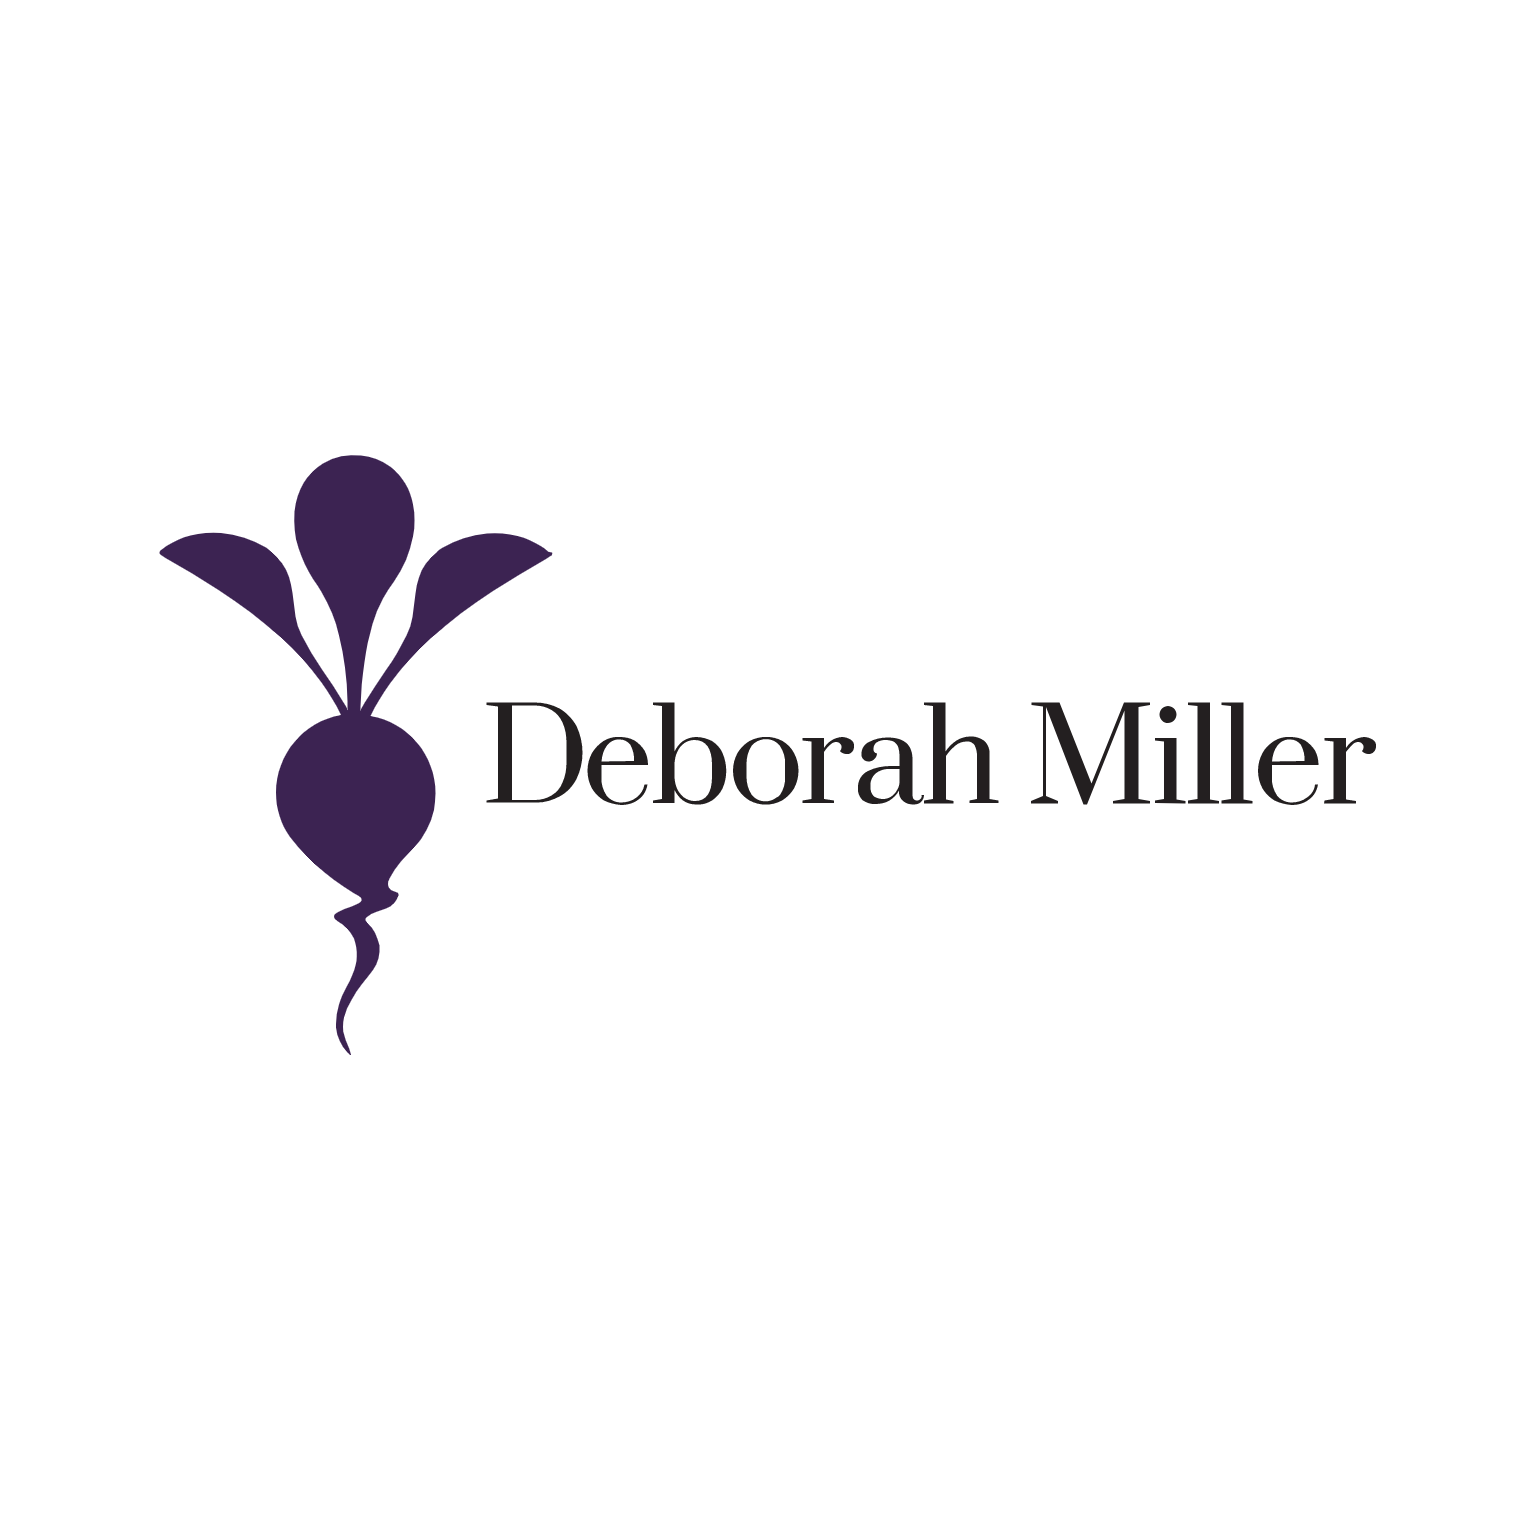 Deborah Miller Catering & Events - New York, NY 10038 - (212)964-1300 | ShowMeLocal.com